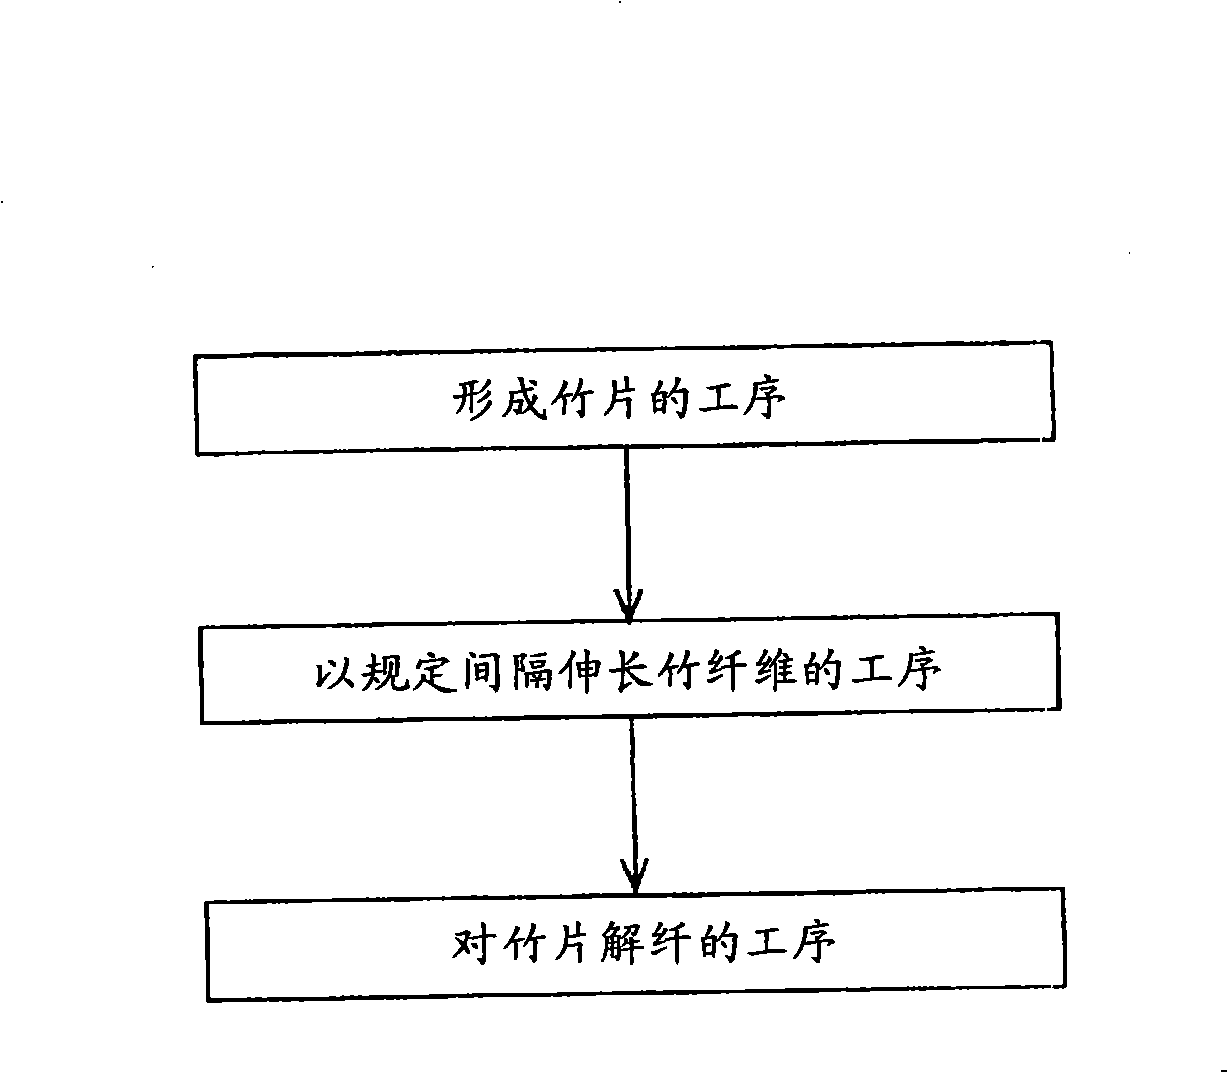 Method and apparatus for manufacturing bamboo fiber